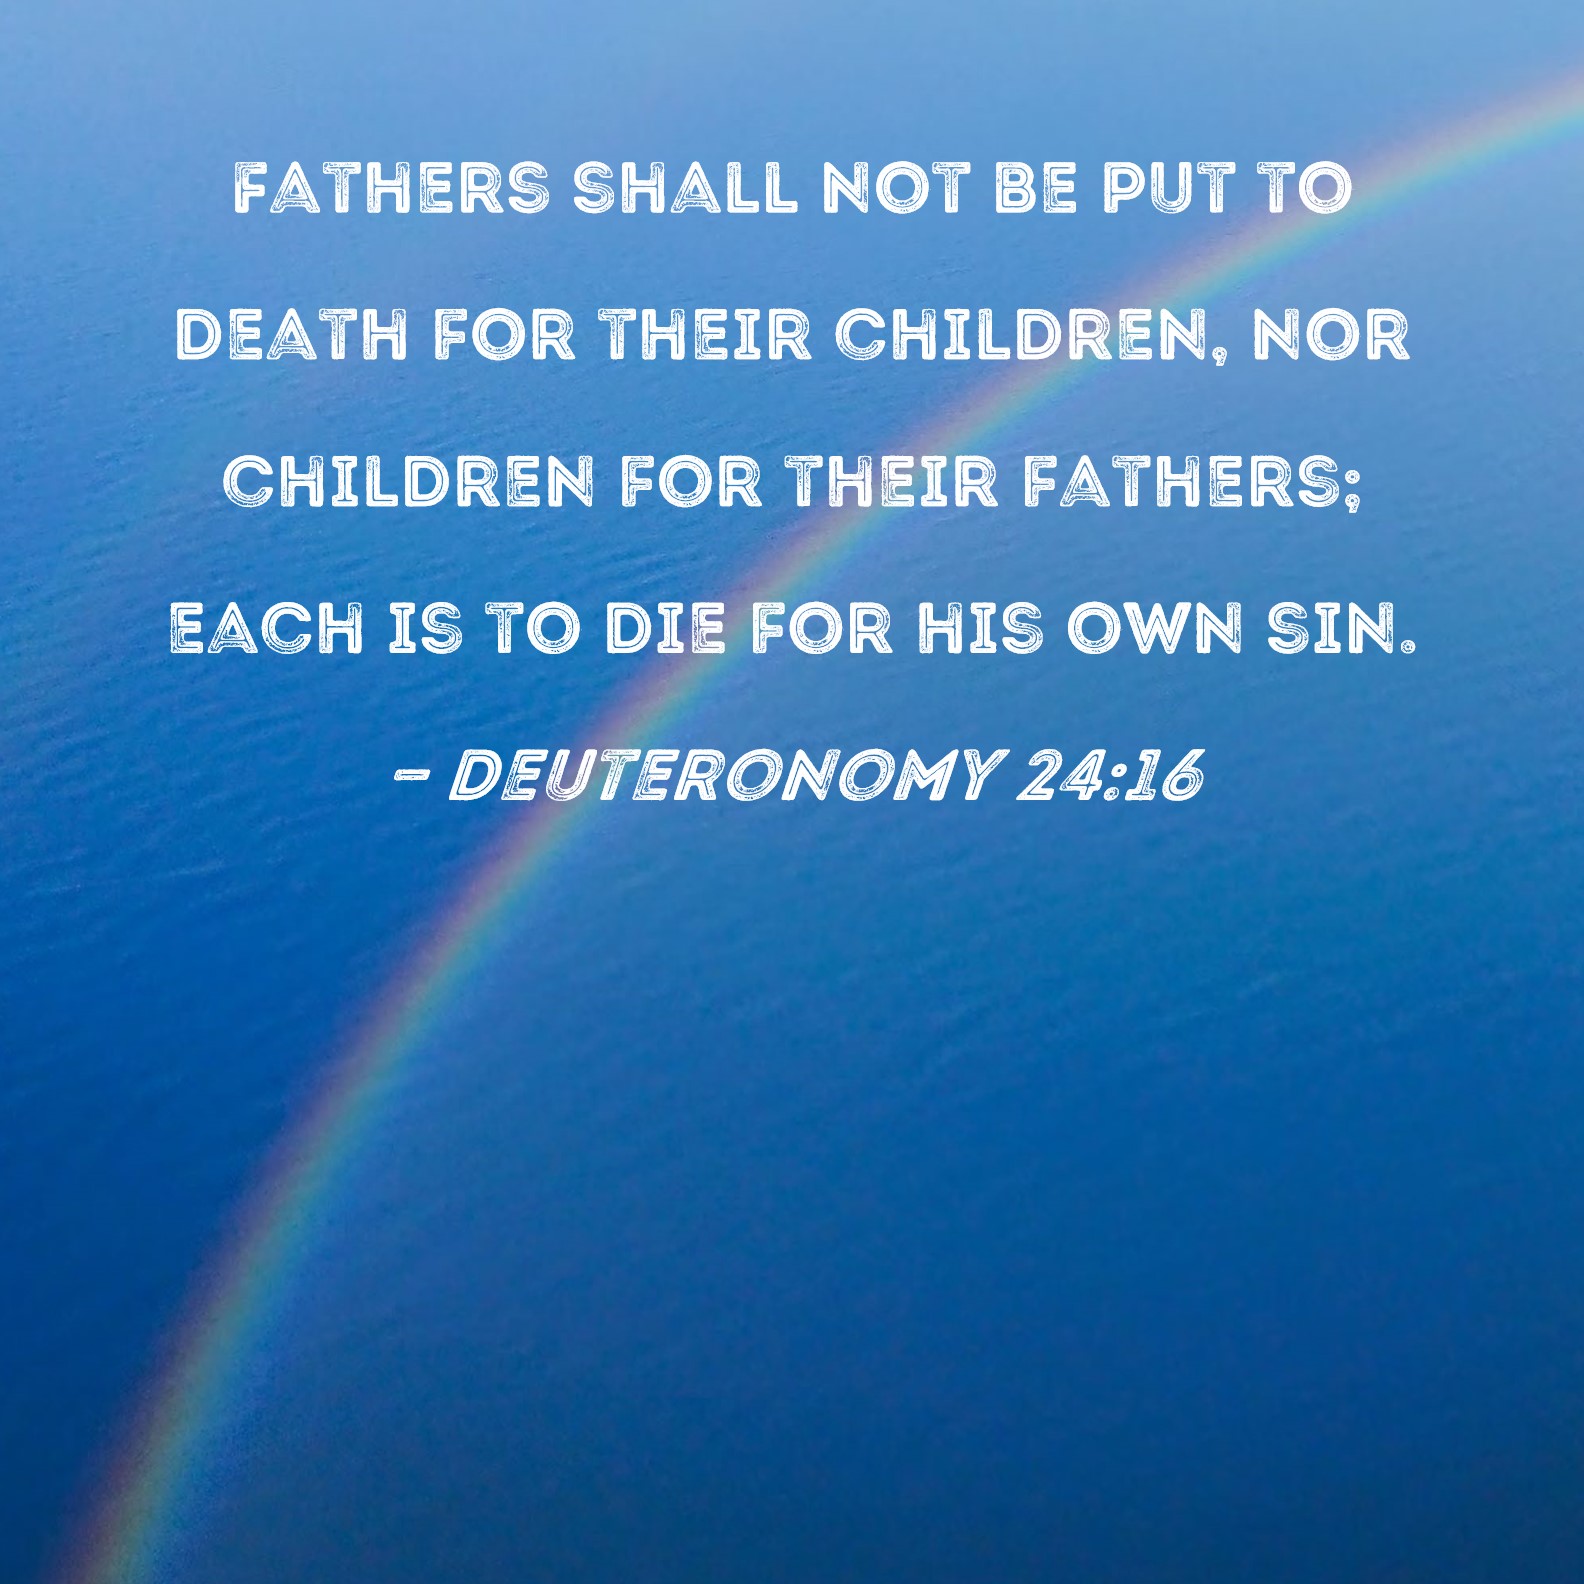 Deuteronomy 24:16 Fathers shall not be put to death for their children, nor  children for their fathers; each is to die for his own sin.